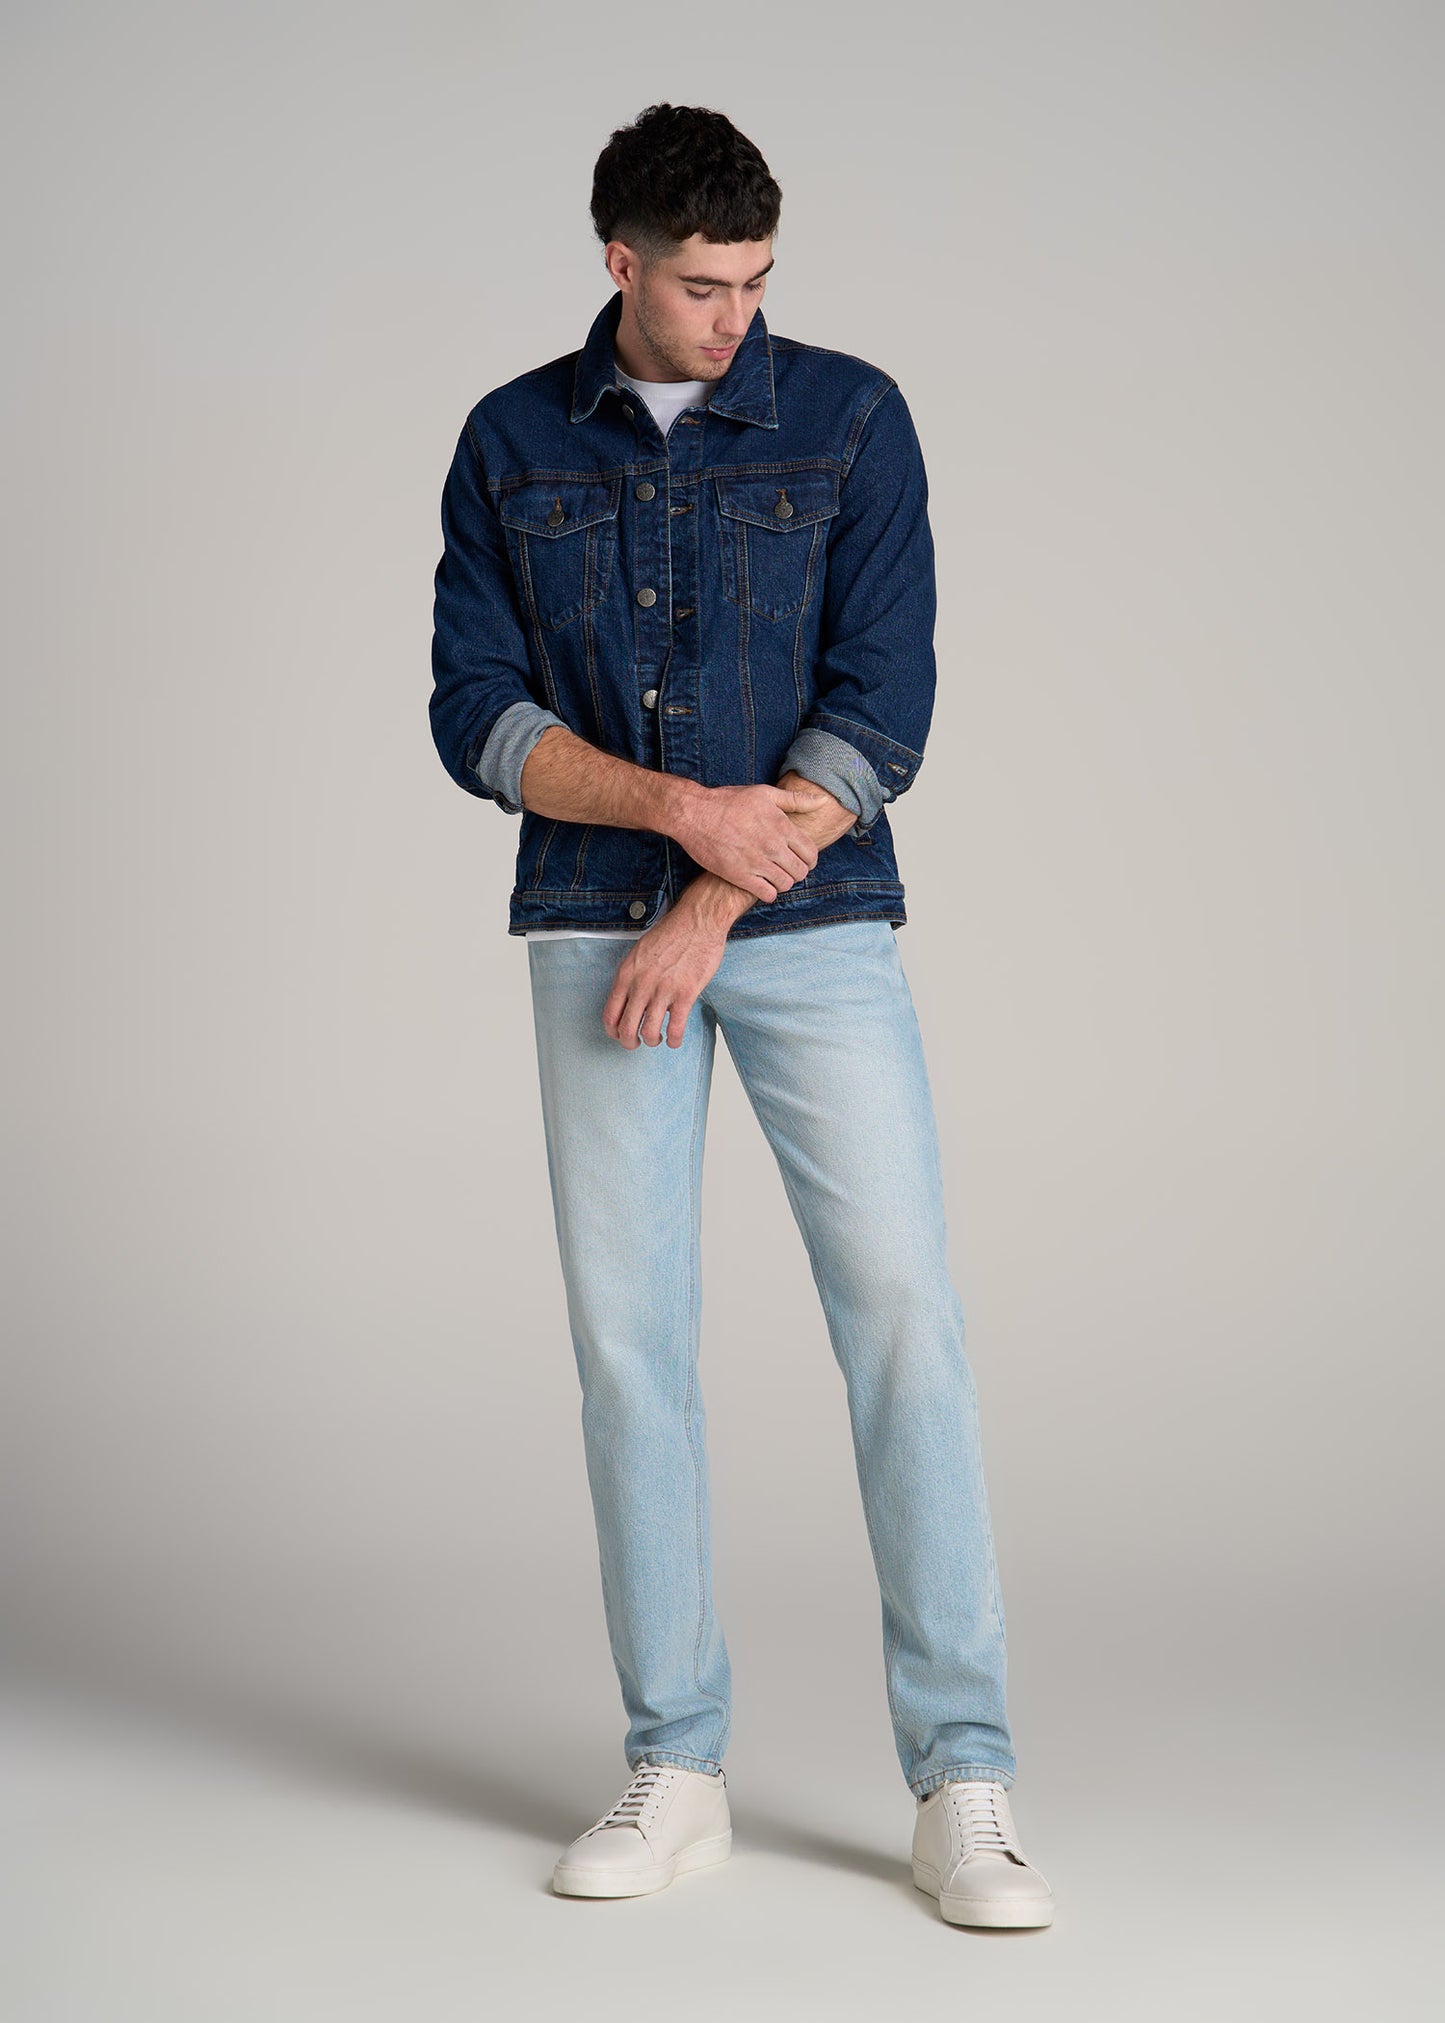 Milo RELAXED TAPERED FIT Jeans for Tall Men in Salt Lake Wash